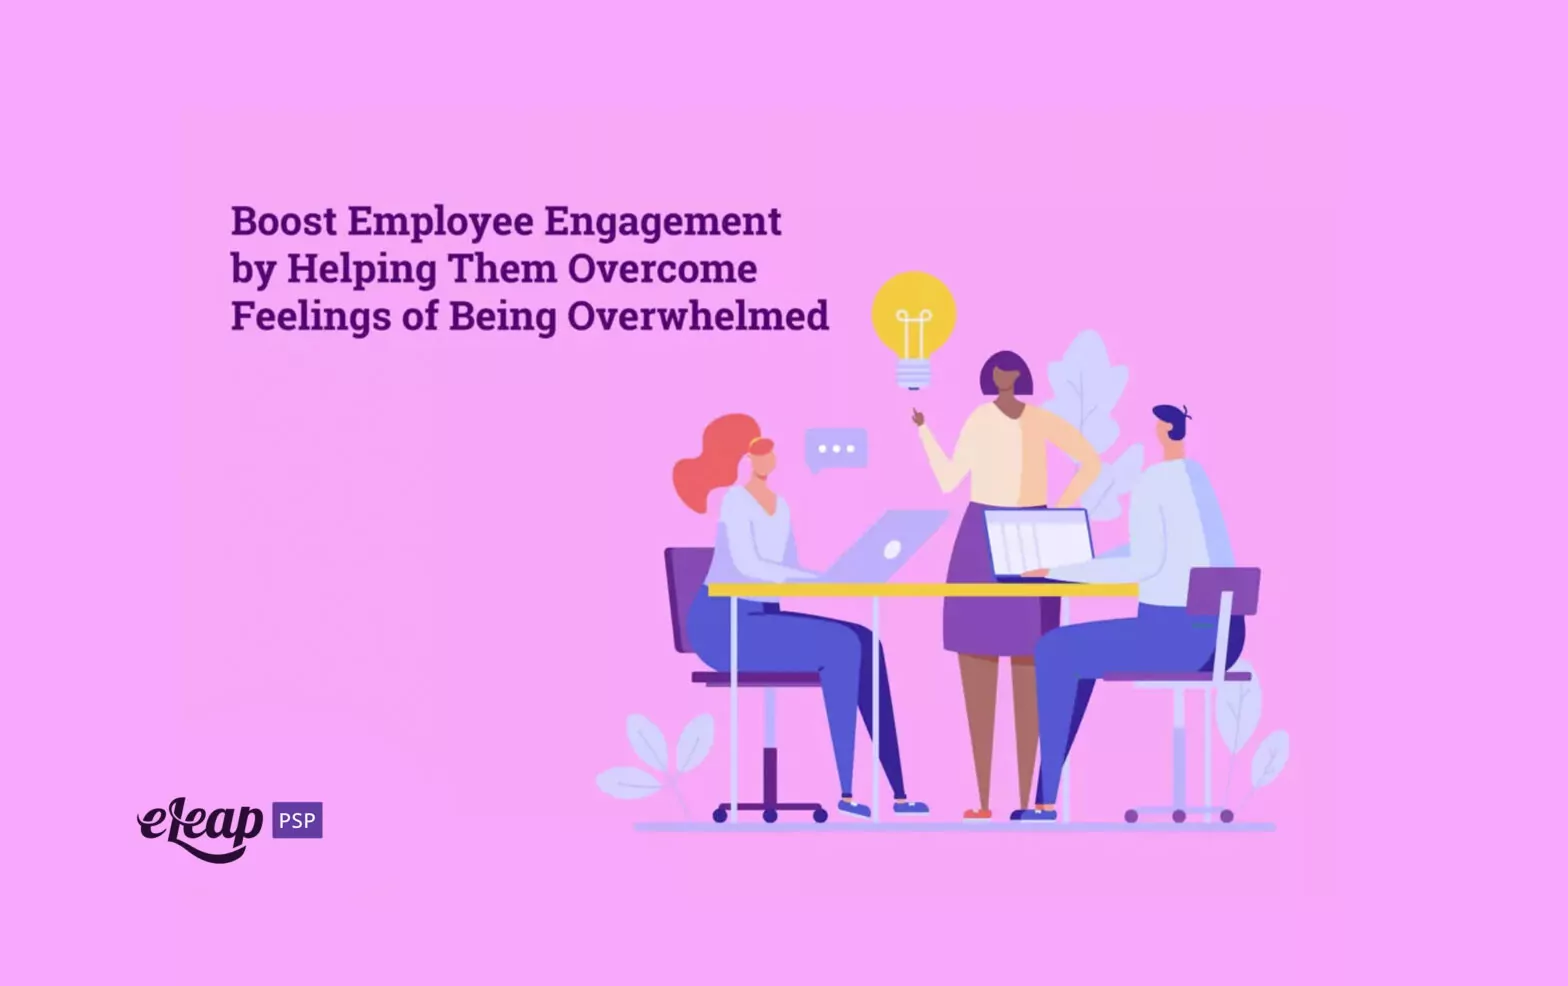 Boost Employee Engagement by Helping Them Overcome Feelings of Being Overwhelmed